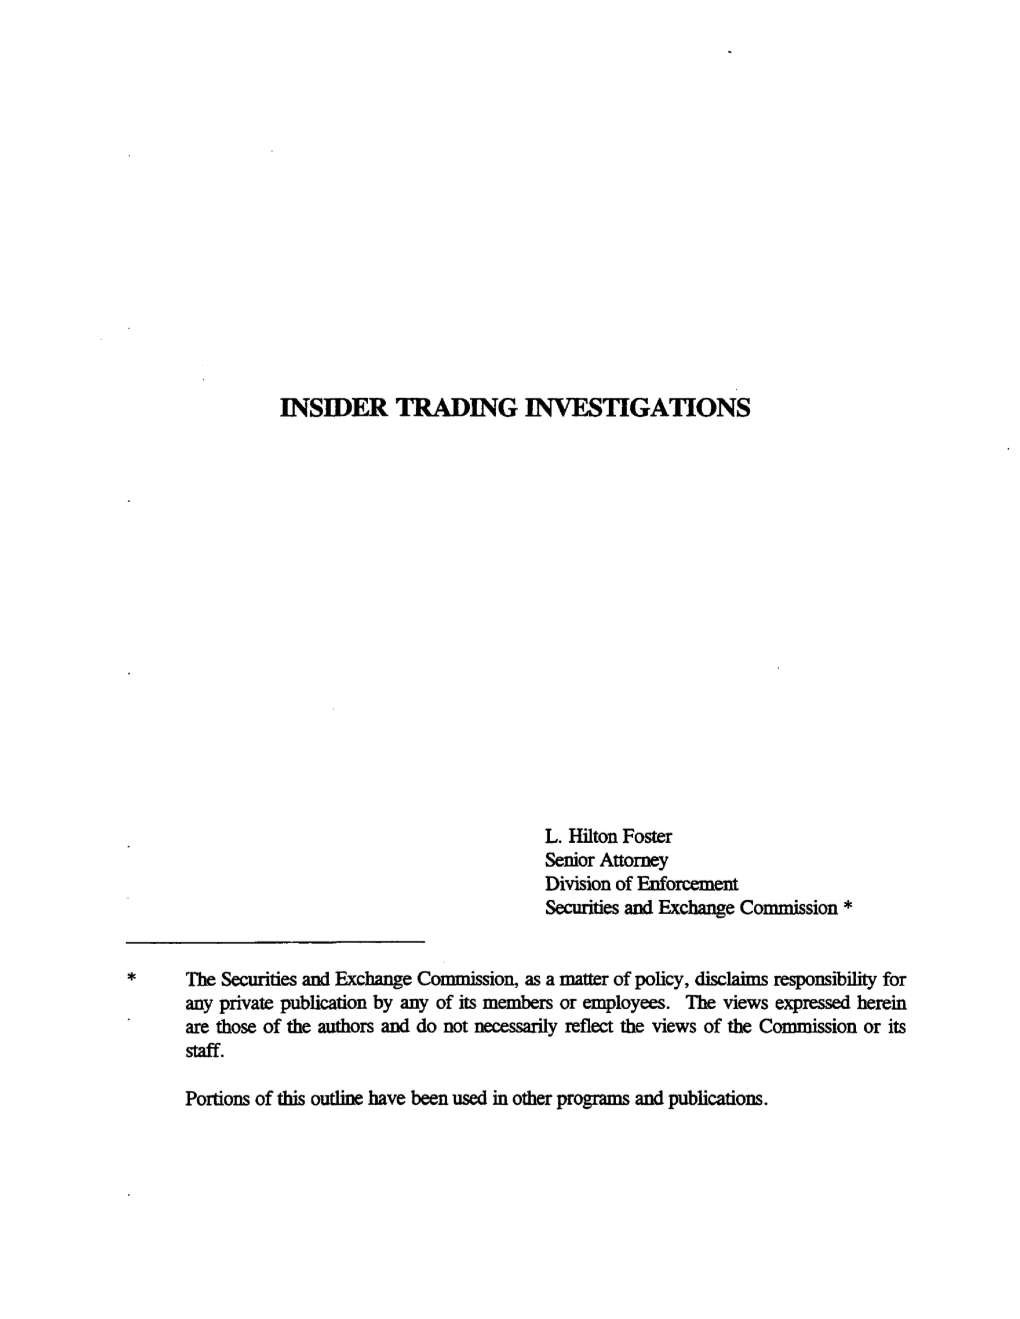 Insider Trading Investigations Are Generally Started Following a Public Announcement Which Materially Effects the Price of the Issuer's Securities